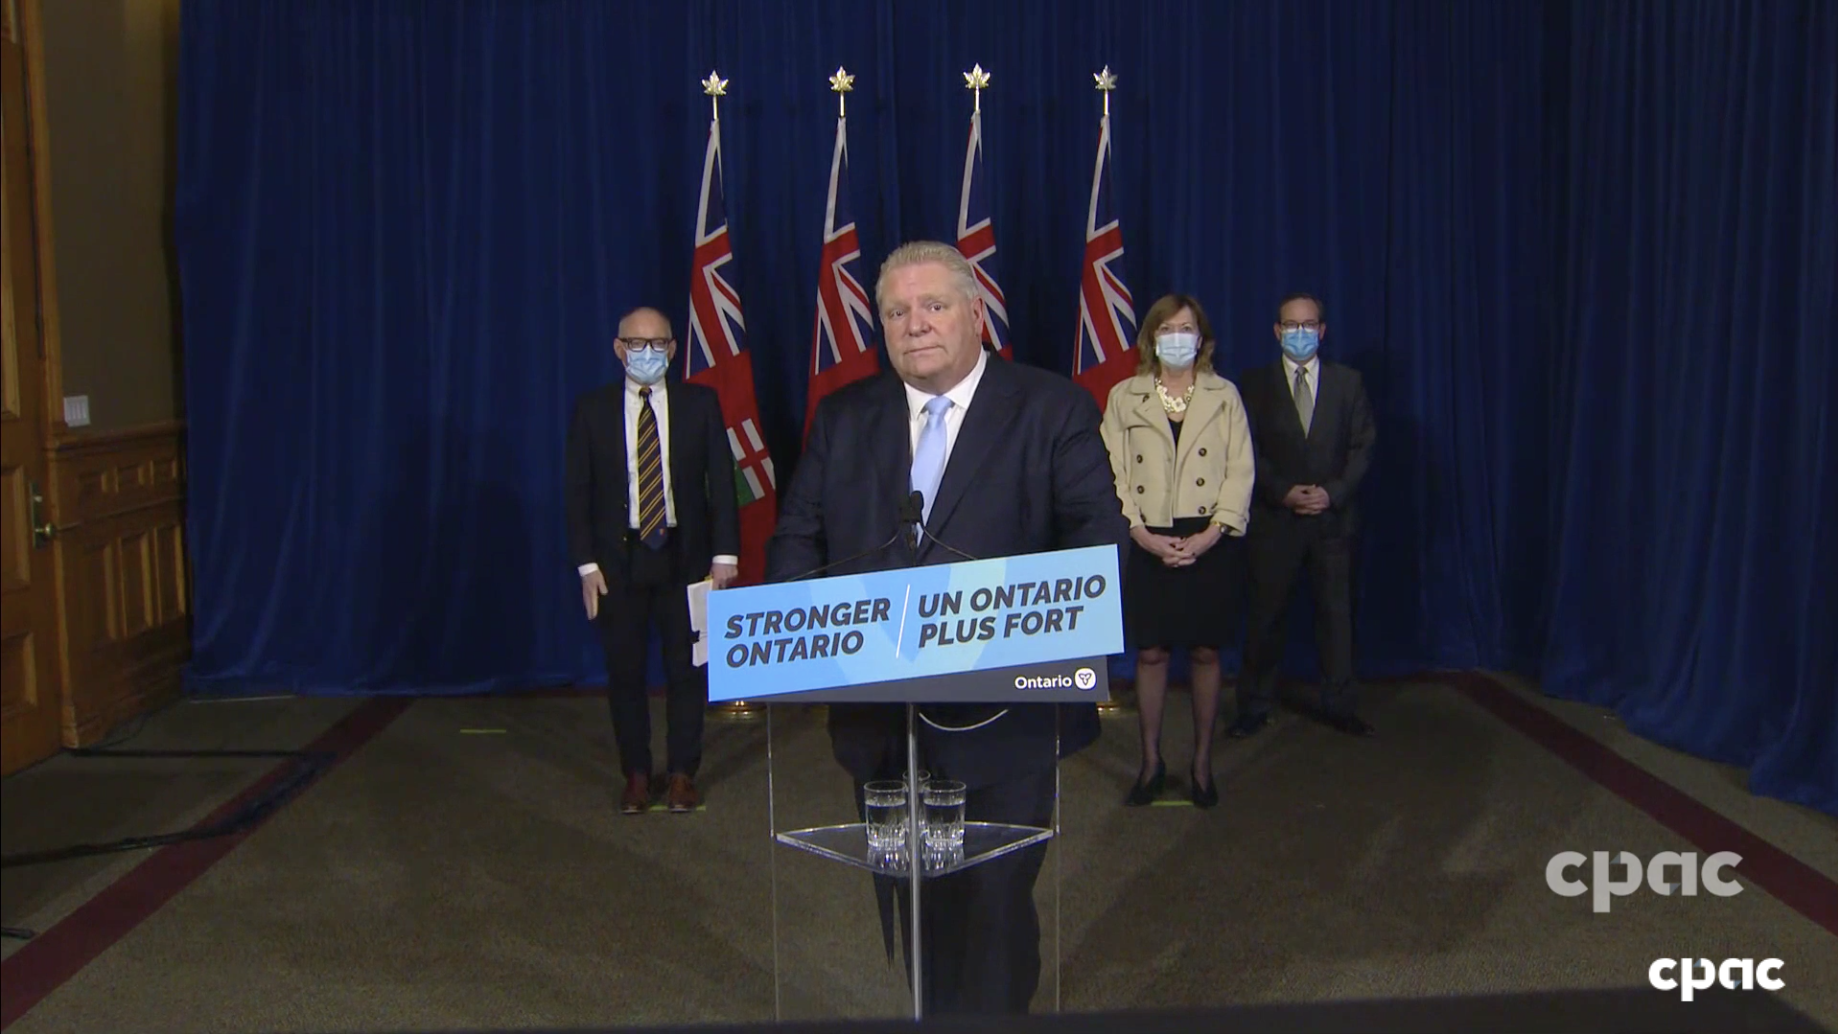 New survey shows majority of Ontarians hesitant about reopening